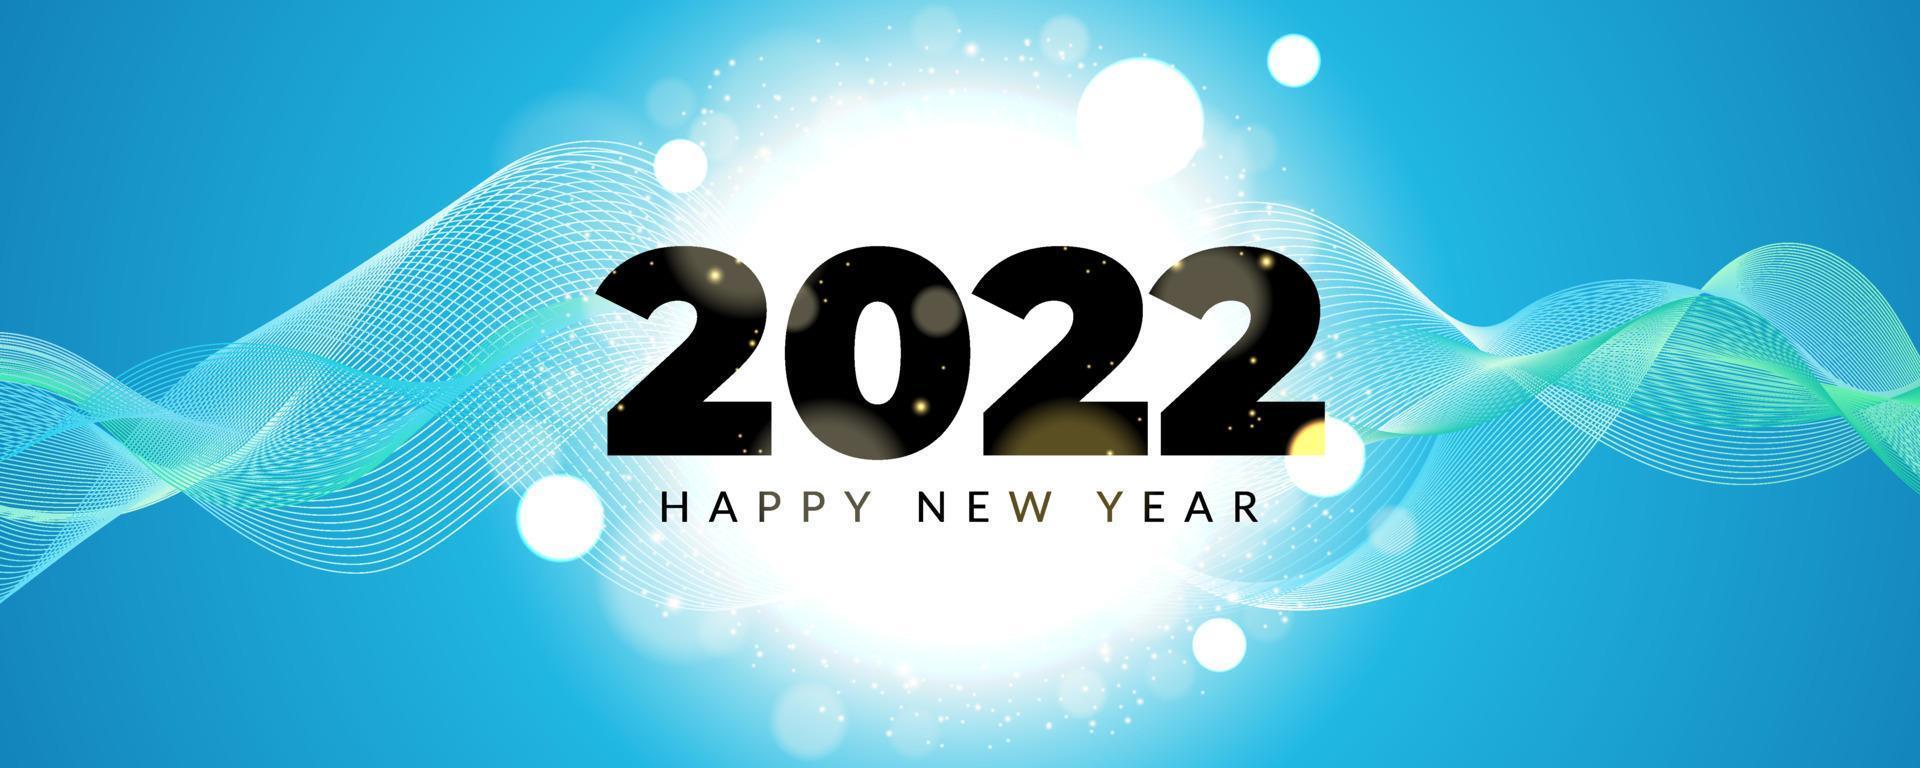 Happy new year 2022 background with glare behind the numbers and shiny particles. Bright 2022 background concept vector